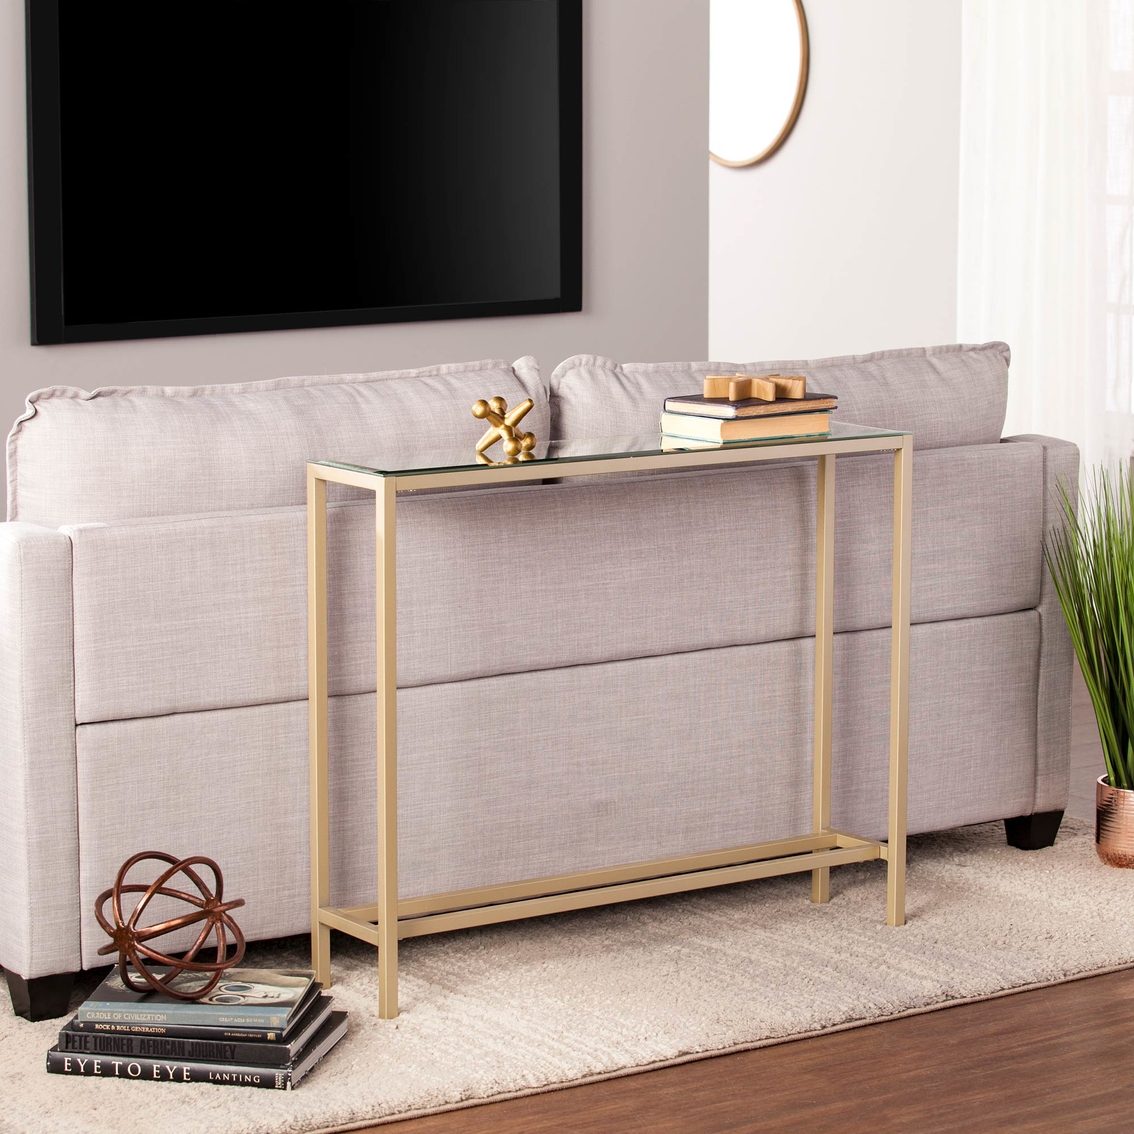 Southern Enterprises Darrin Console Table - Image 4 of 4